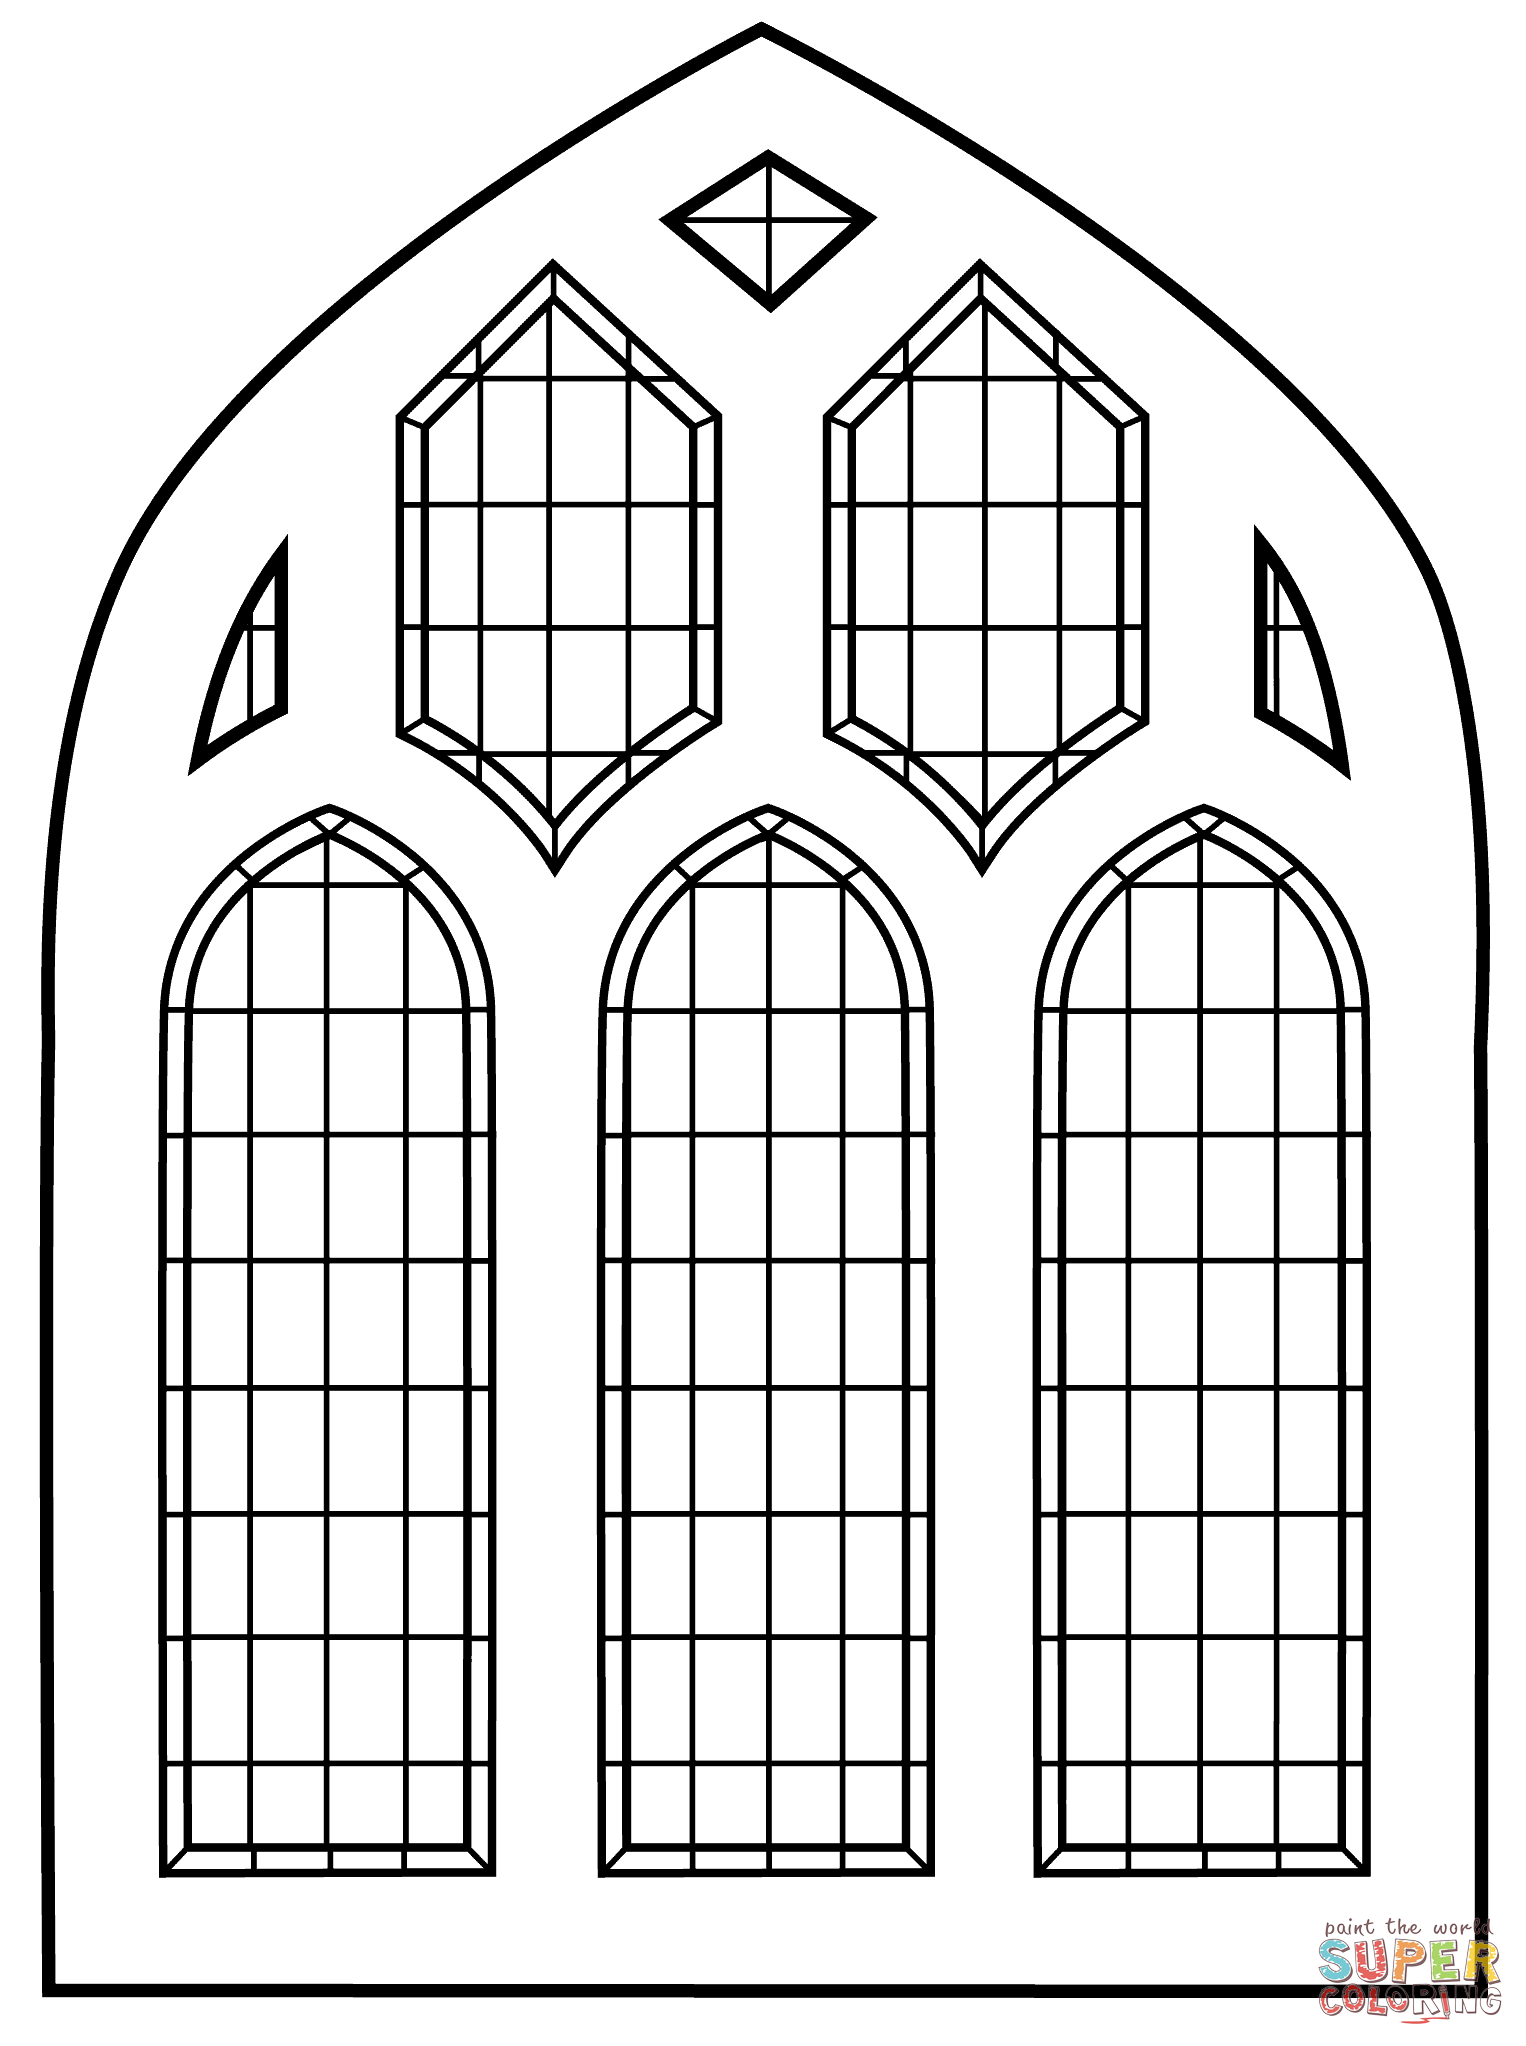 Stained Glass Window coloring page | Free Printable Coloring Pages